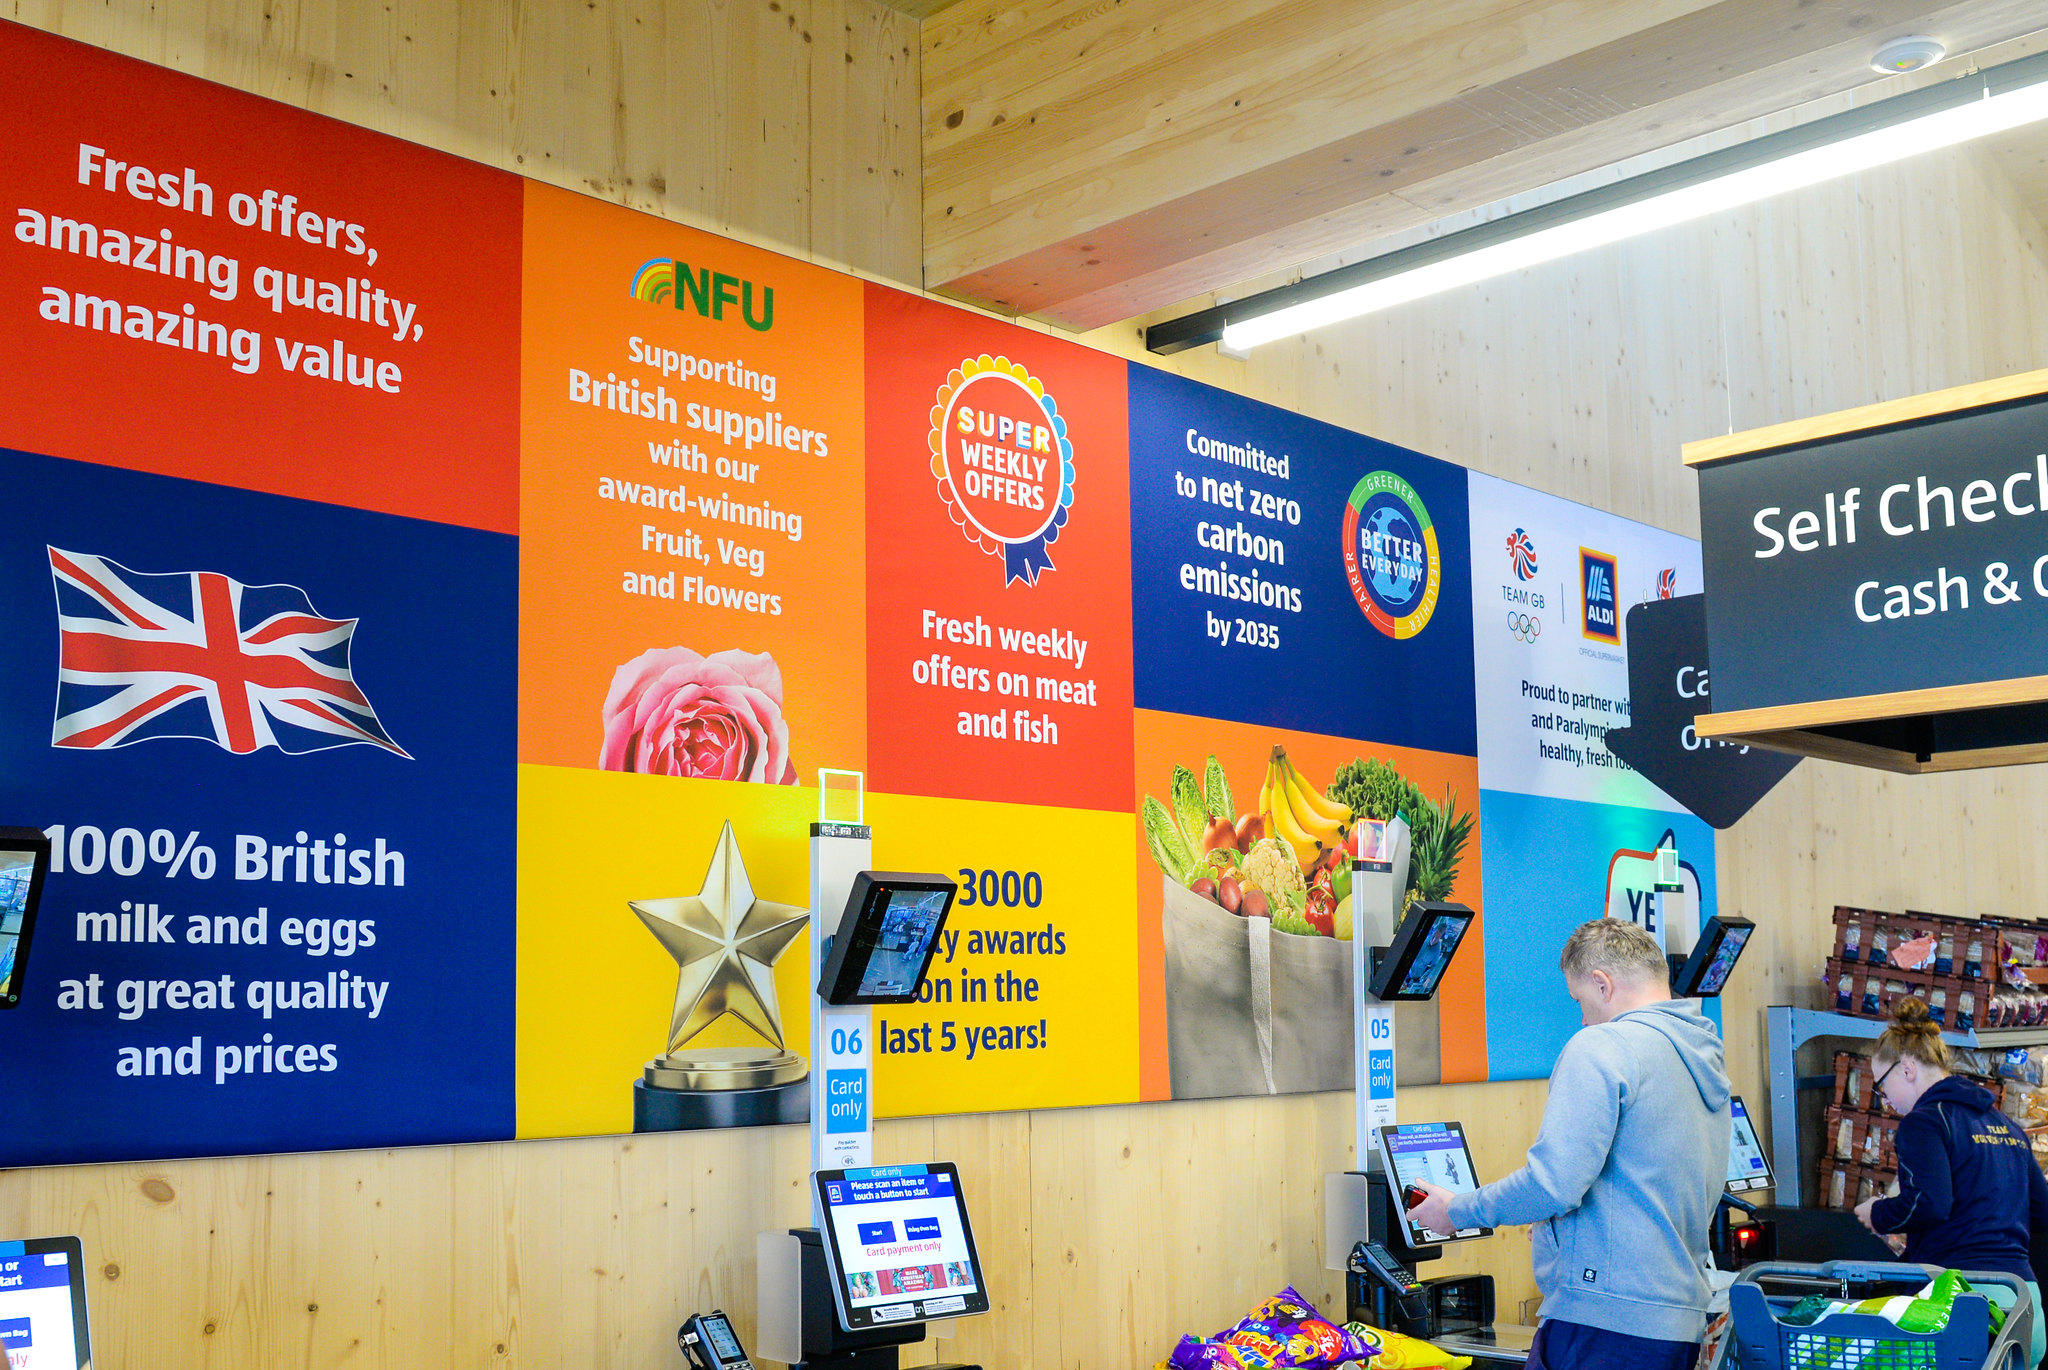 Wall graphics with Aldi's sustainable missions